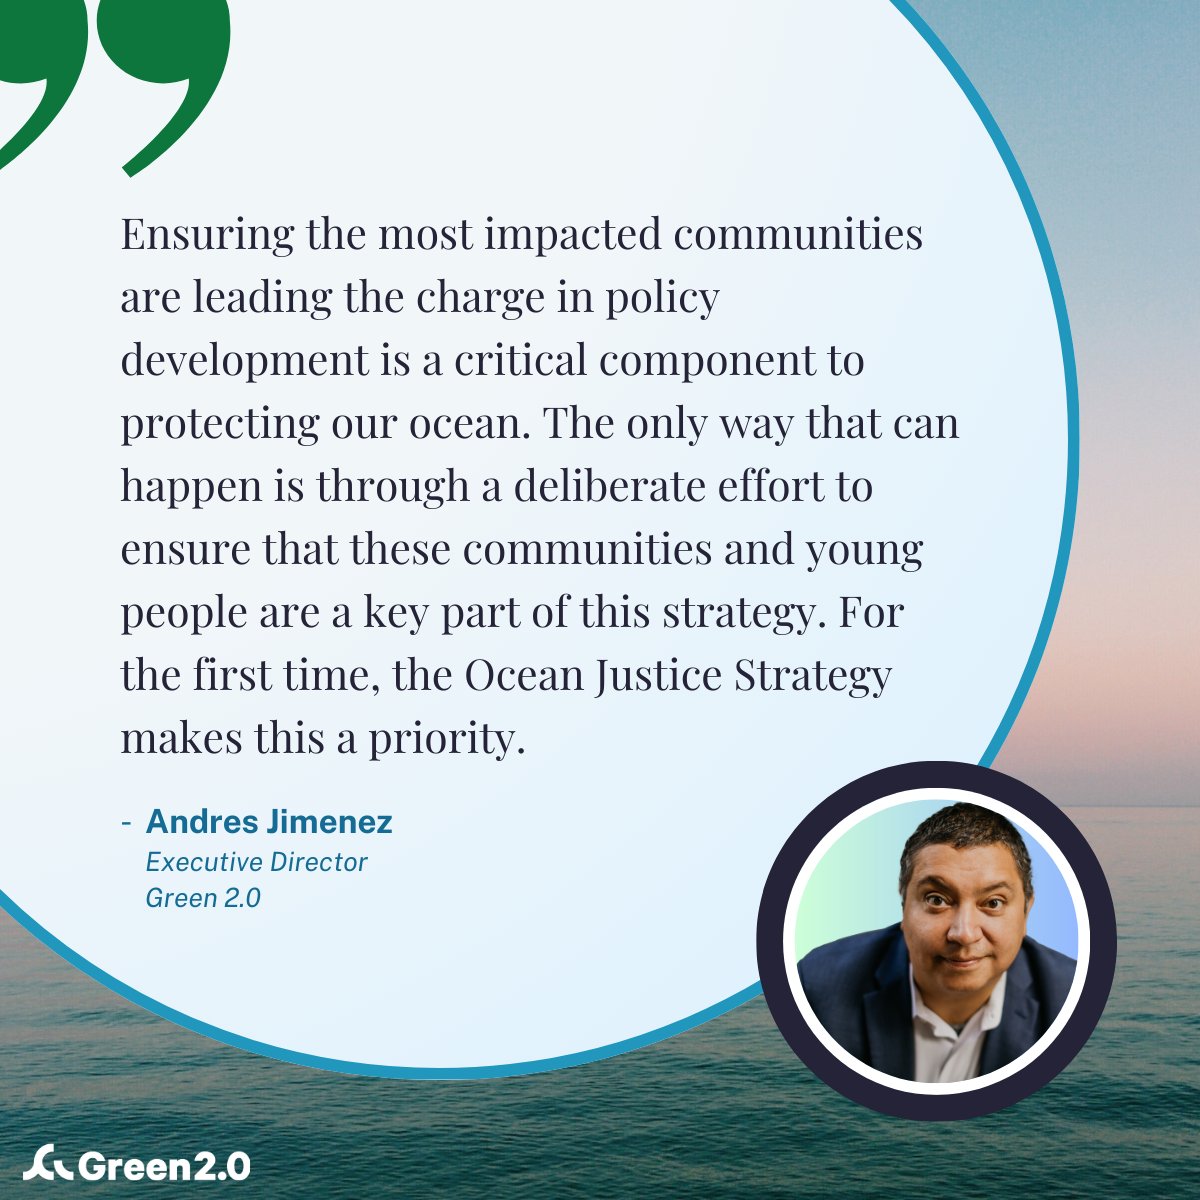 Last week, the U.S. took a step toward #OceanJustice at home with the first-ever Ocean Justice Strategy released by @WHCEQ & @WHOSTP! Green 2.0 ED @andresforchange speaks on why this strategy is essential, learn more at oceanjusticeforum.info/ocean-justice-….